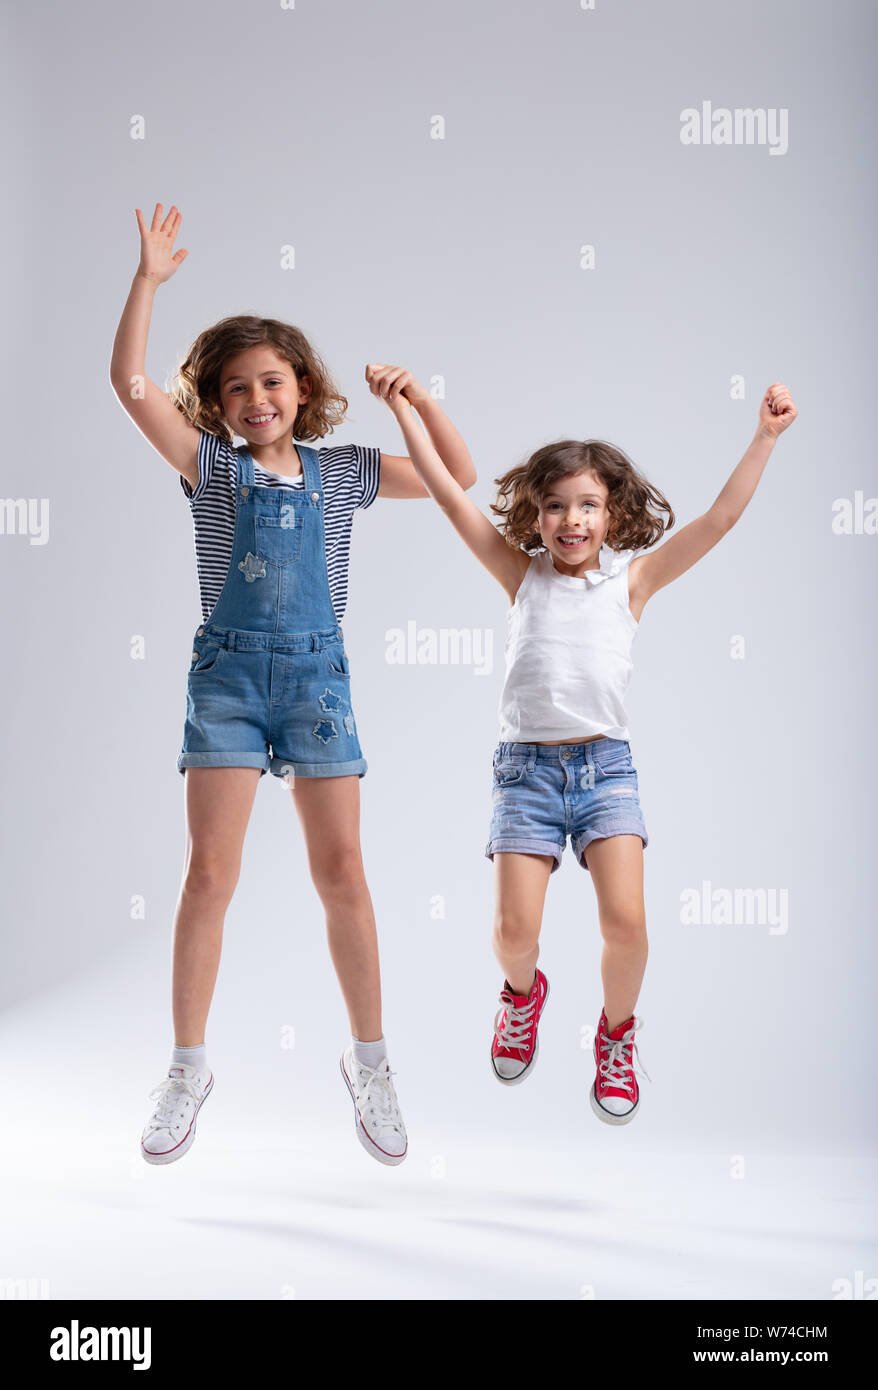 Two vivacious lively little girls jumping high into the air together holding hands with beaming happy smiles over a white background with copy space Stock Photo